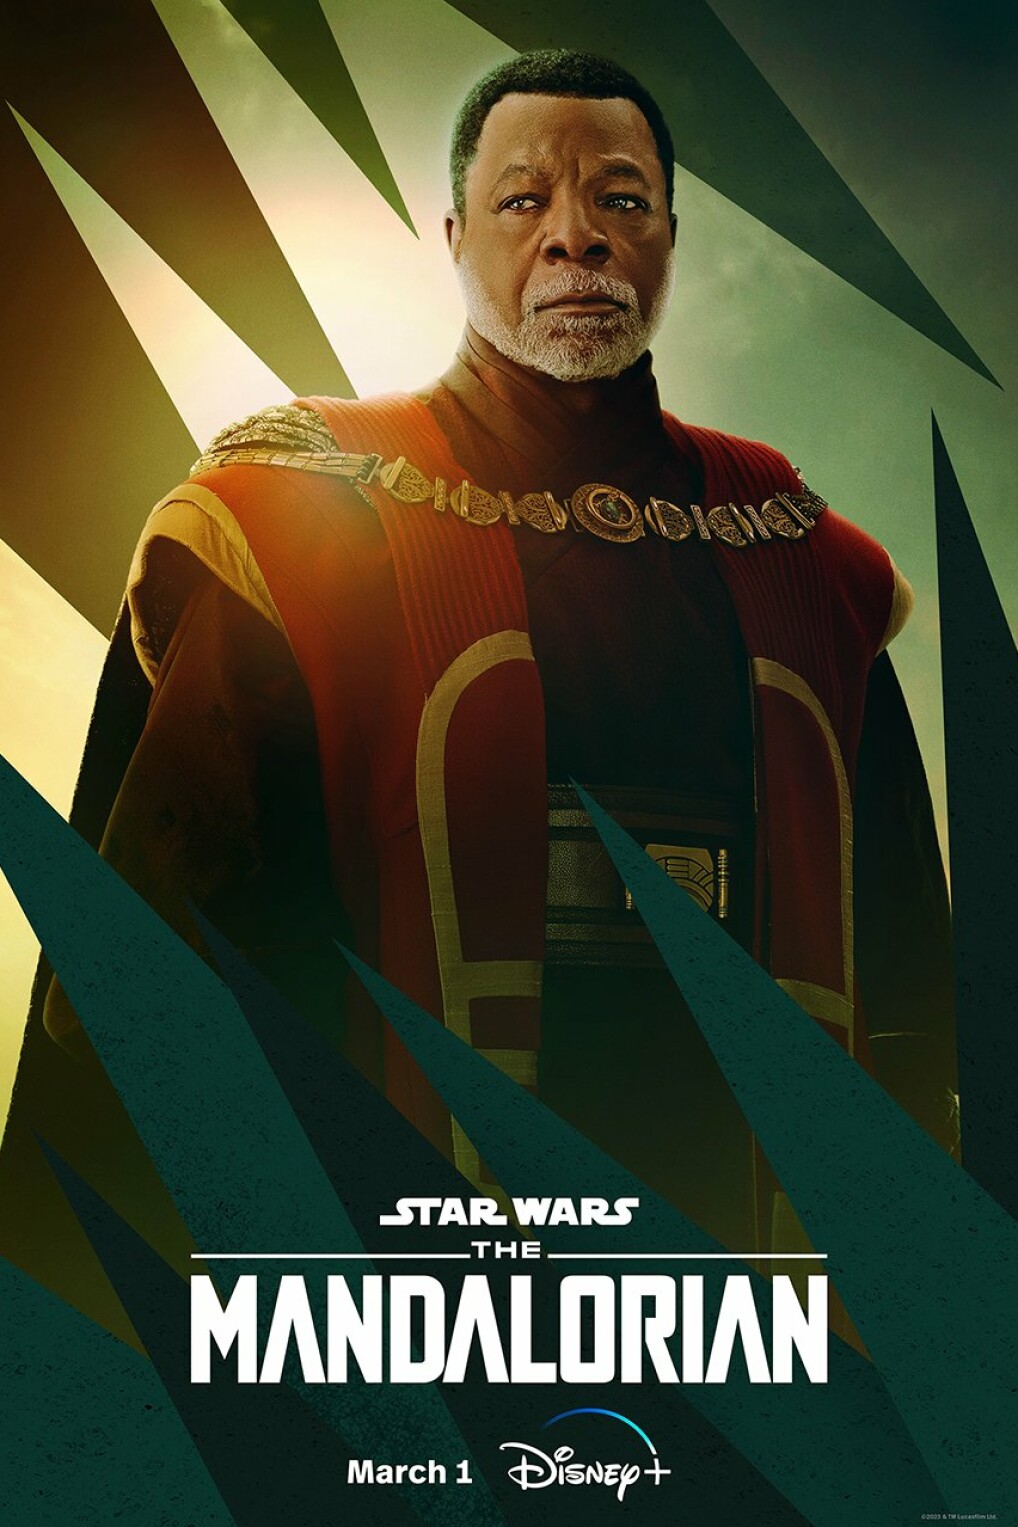 The Mandalorian Season 3: New Character Posters for the Disney+ Series - Image 2 of 3